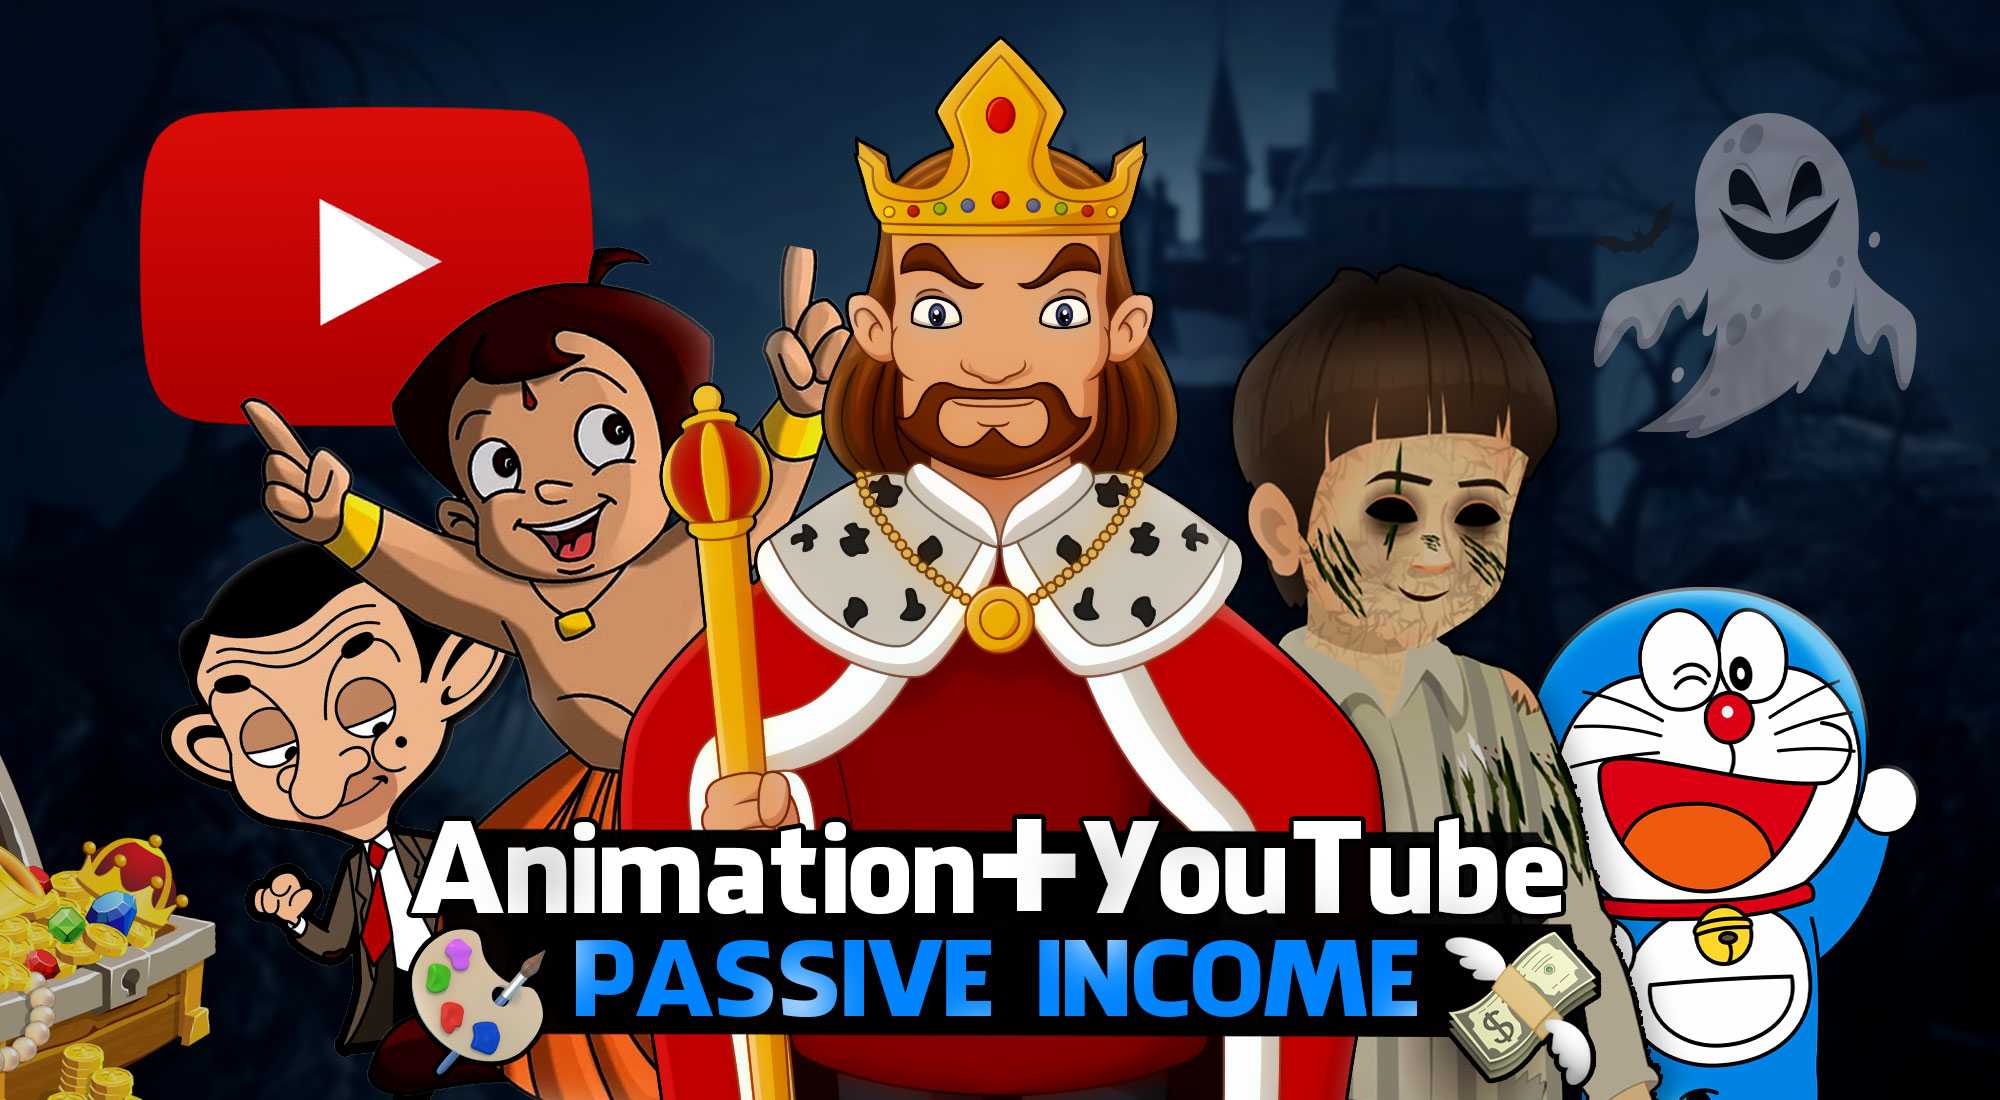 Make Animated Videos & Earn $1500/Month from YouTube | MSB Academy